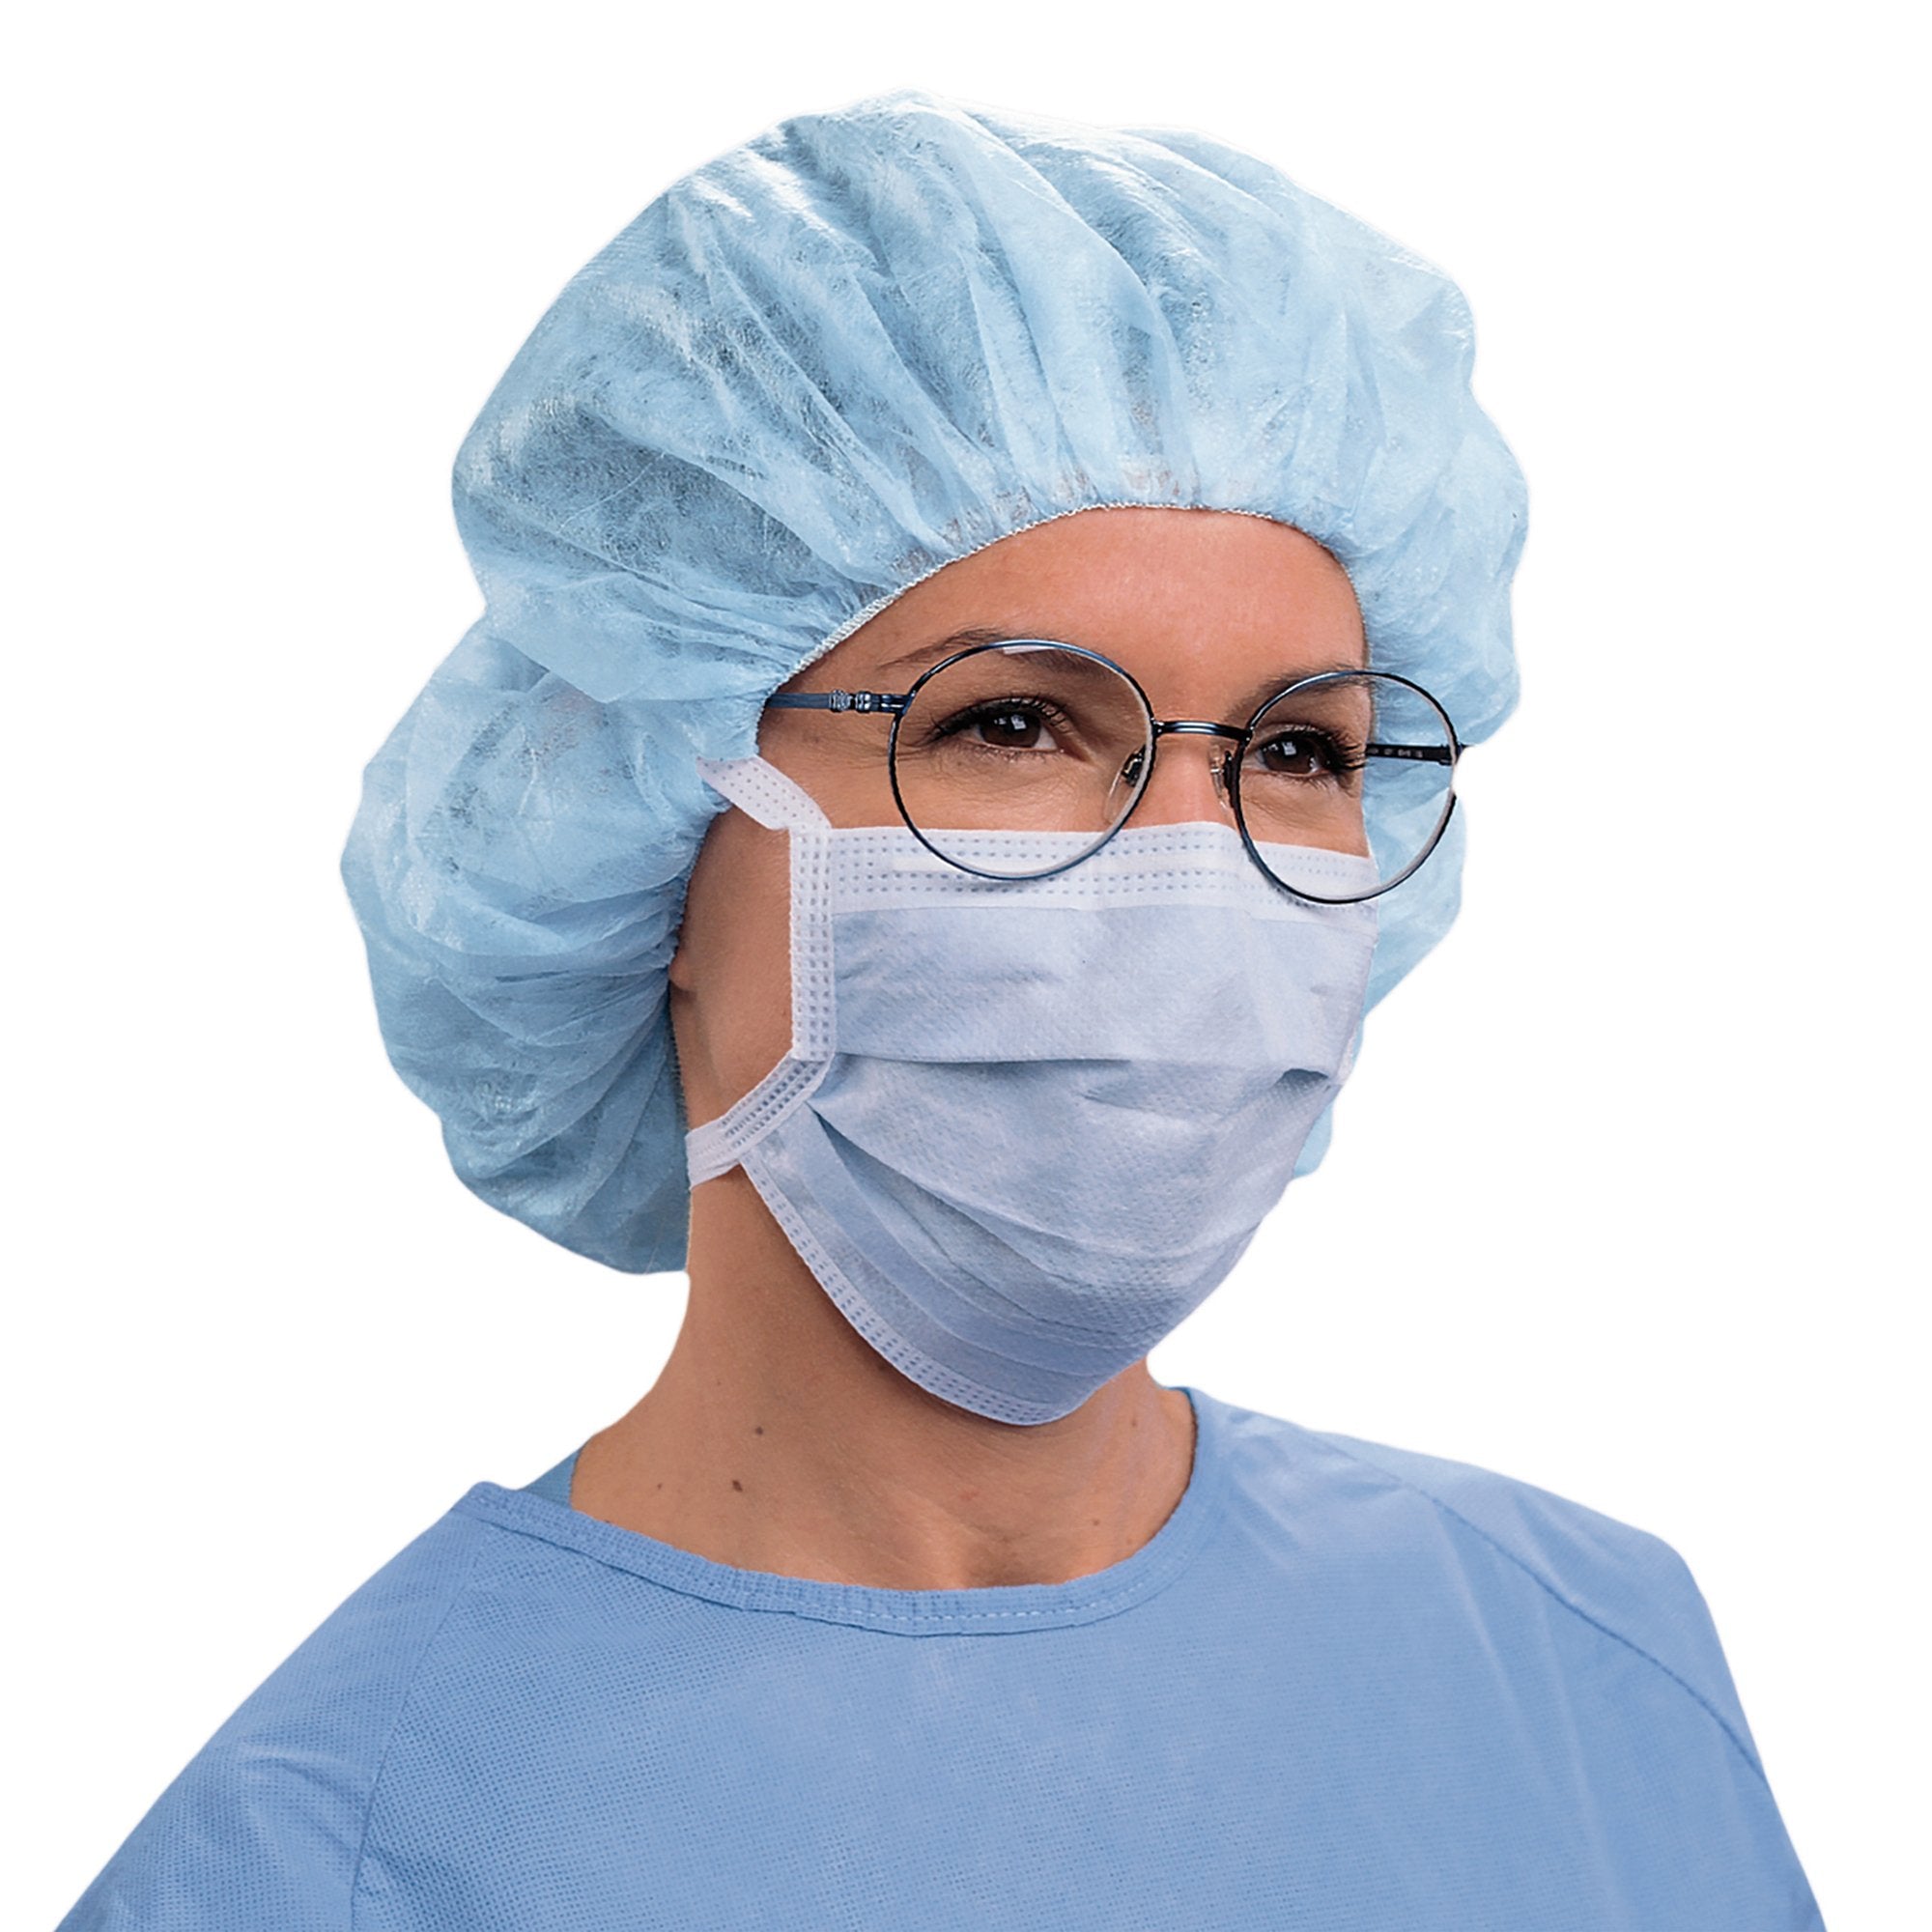 Surgical Mask Anti-fog Foam Pleated Tie Closure One Size Fits Most Blue NonSterile Not Rated Adult